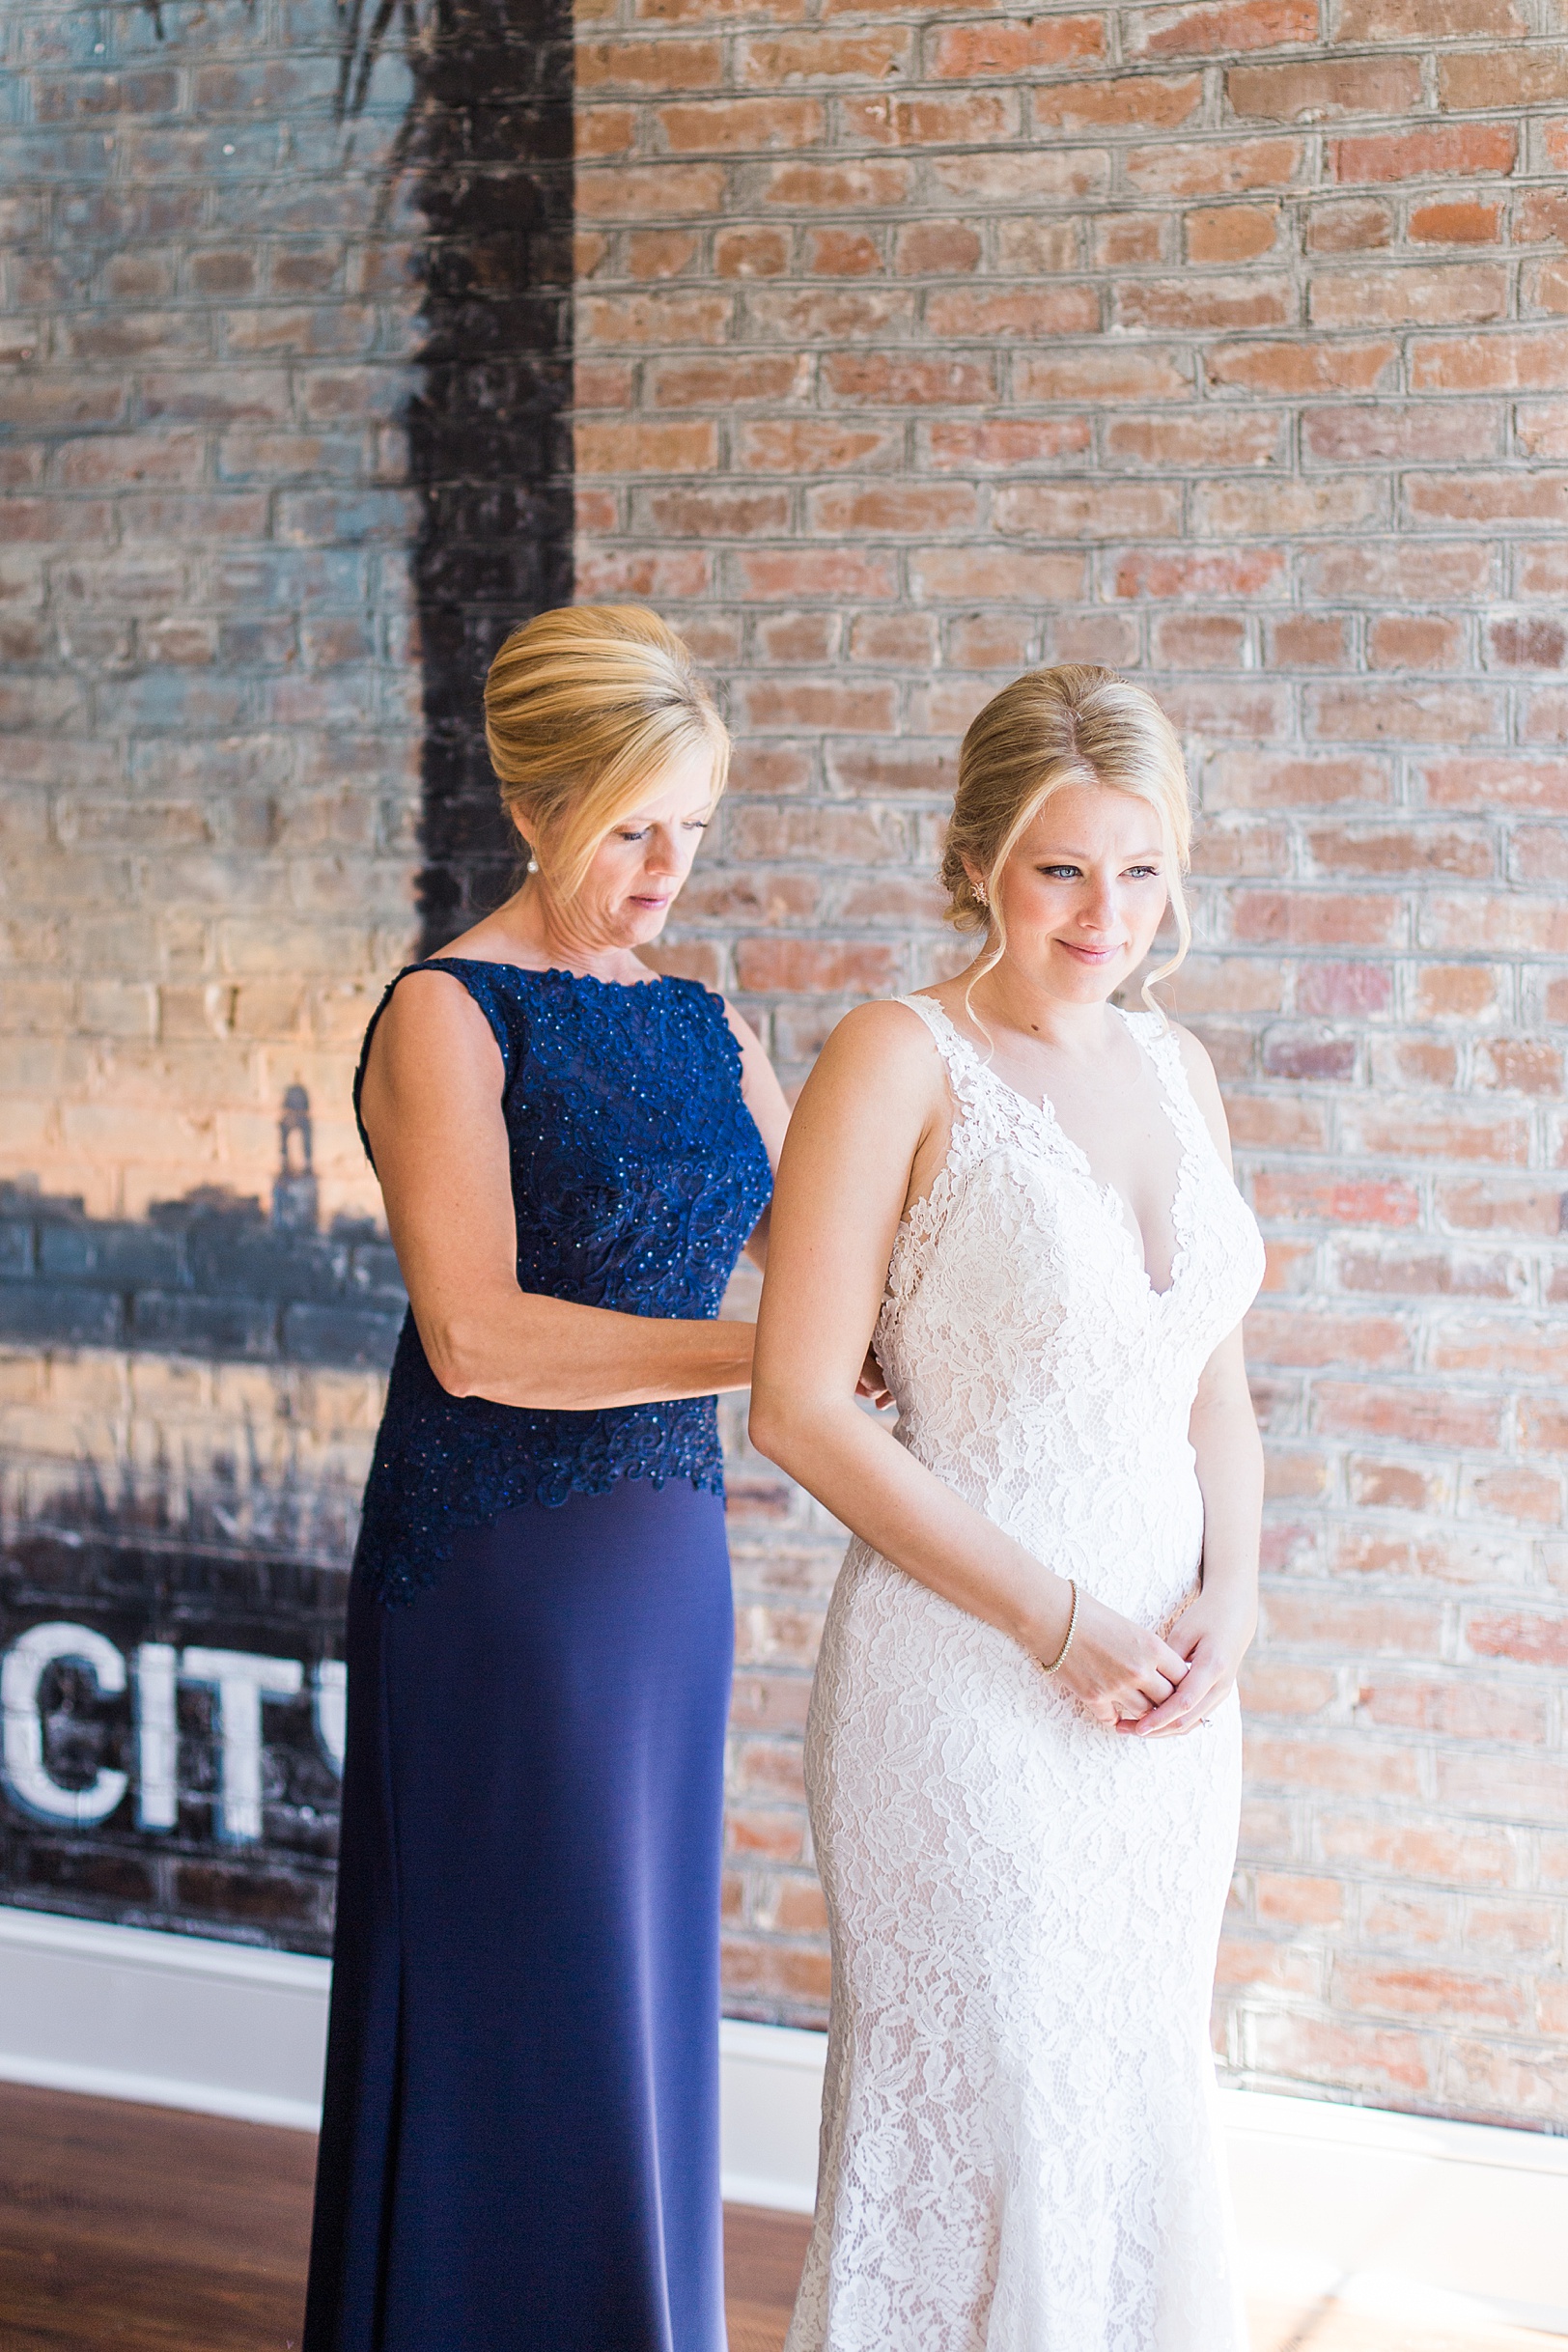 Mother of Bride helping Daughter get into Wedding Dress